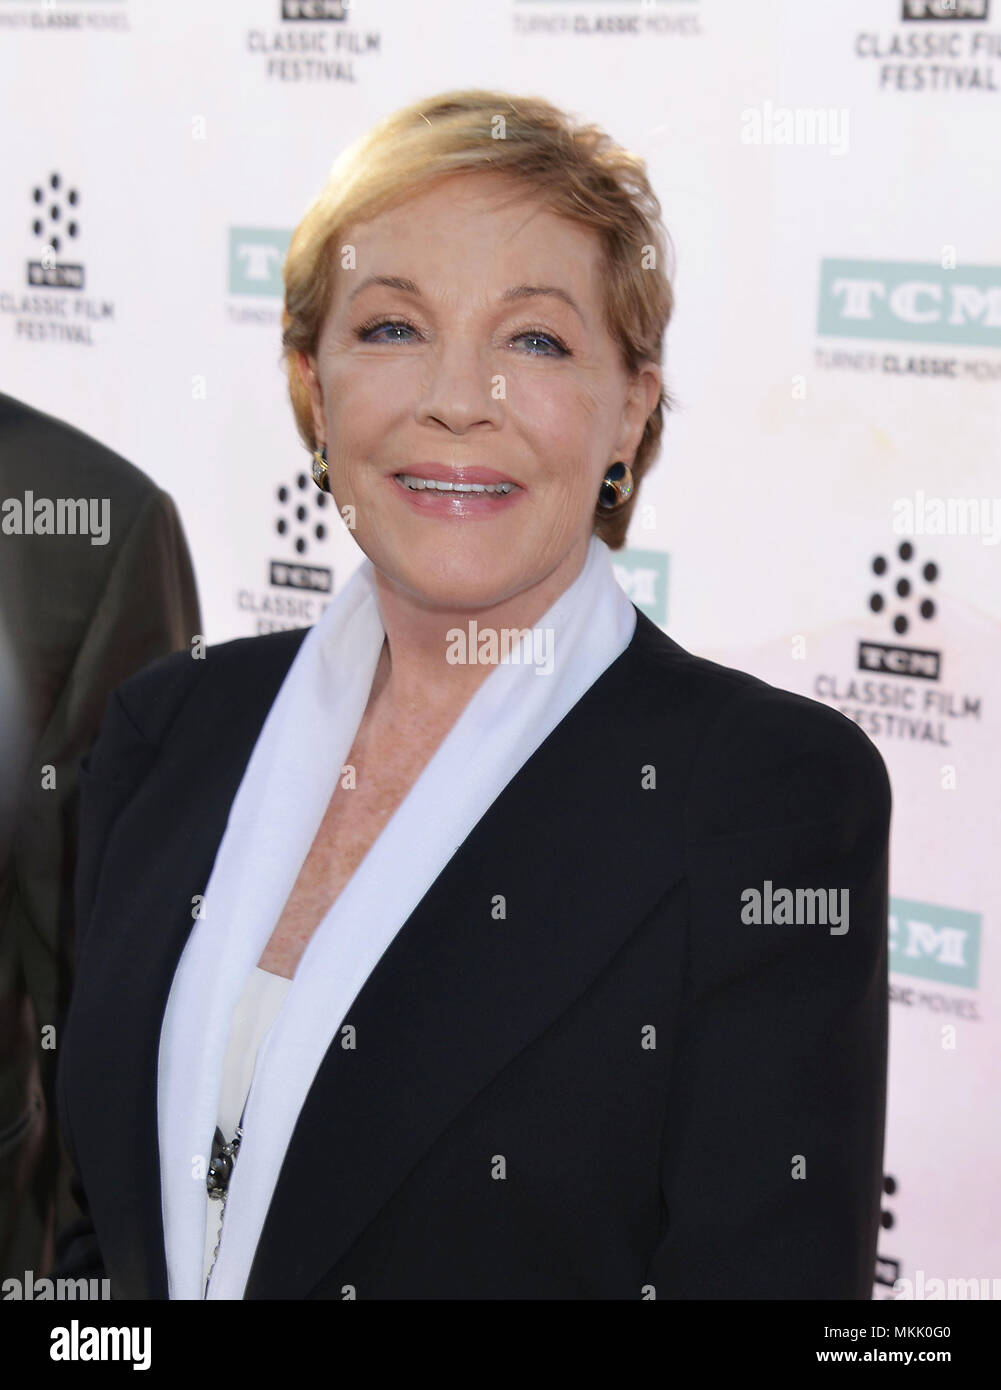 Julie Andrews 022 at The Sound Of Music Premiere at the TCL Chinese Theatre in Los Angeles. March 26, 2015.Julie Andrews 022  Event in Hollywood Life - California,  Red Carpet Event, Vertical, USA, Film Industry, Celebrities,  Photography, Bestof, Arts Culture and Entertainment, Topix Celebrities fashion / one person, Vertical, Best of, Hollywood Life, Event in Hollywood Life - California,  Red Carpet and backstage, USA, Film Industry, Celebrities,  movie celebrities, TV celebrities, Music celebrities, Photography, Bestof, Arts Culture and Entertainment,  Topix, headshot, vertical, from the ye Stock Photo